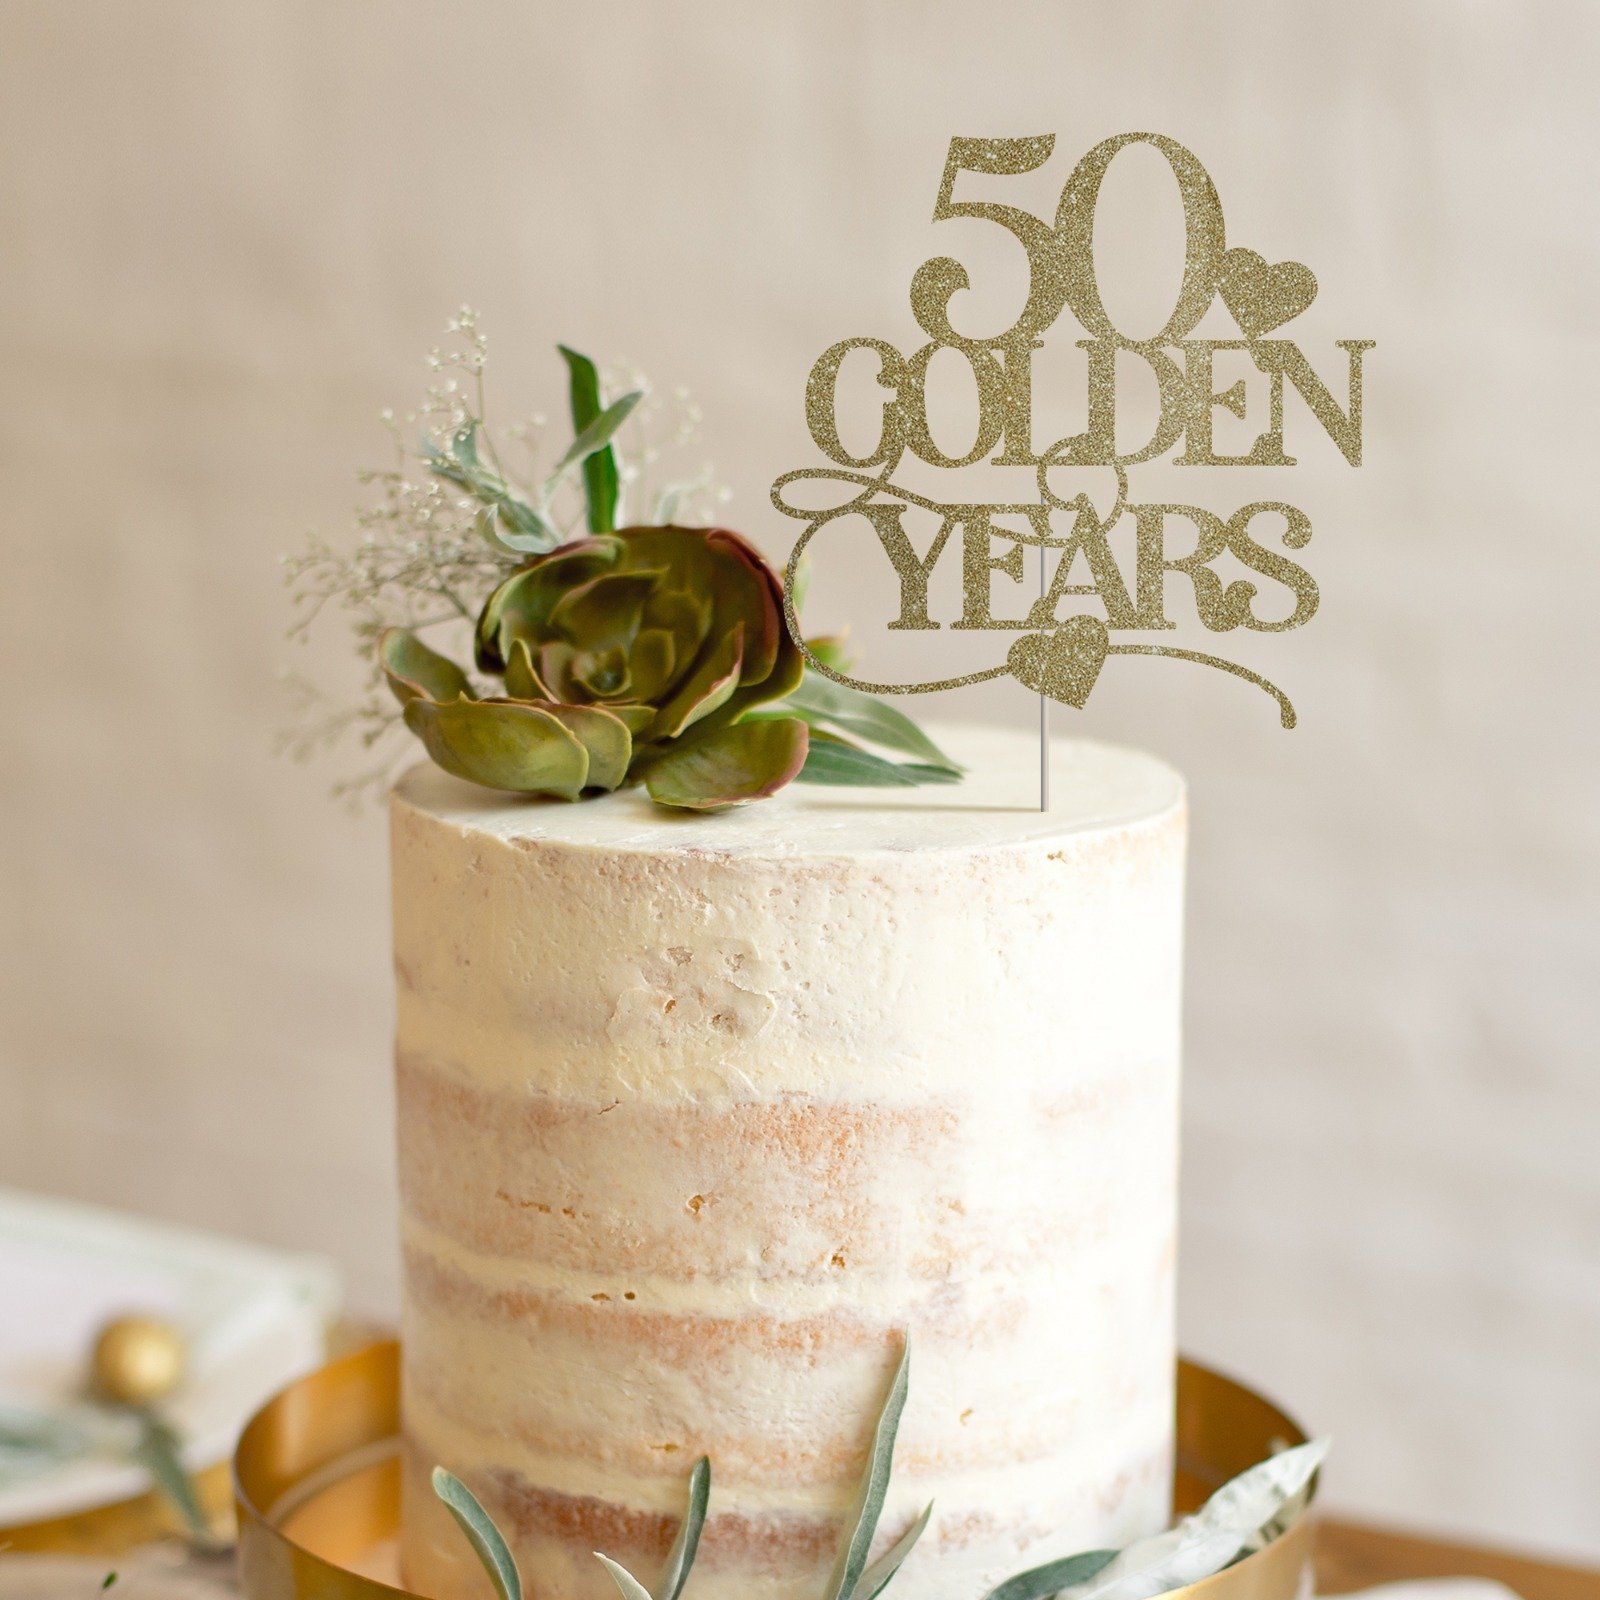 50 golden years cake topper, Wedding anniversary party decor, Gold 50th anniversary